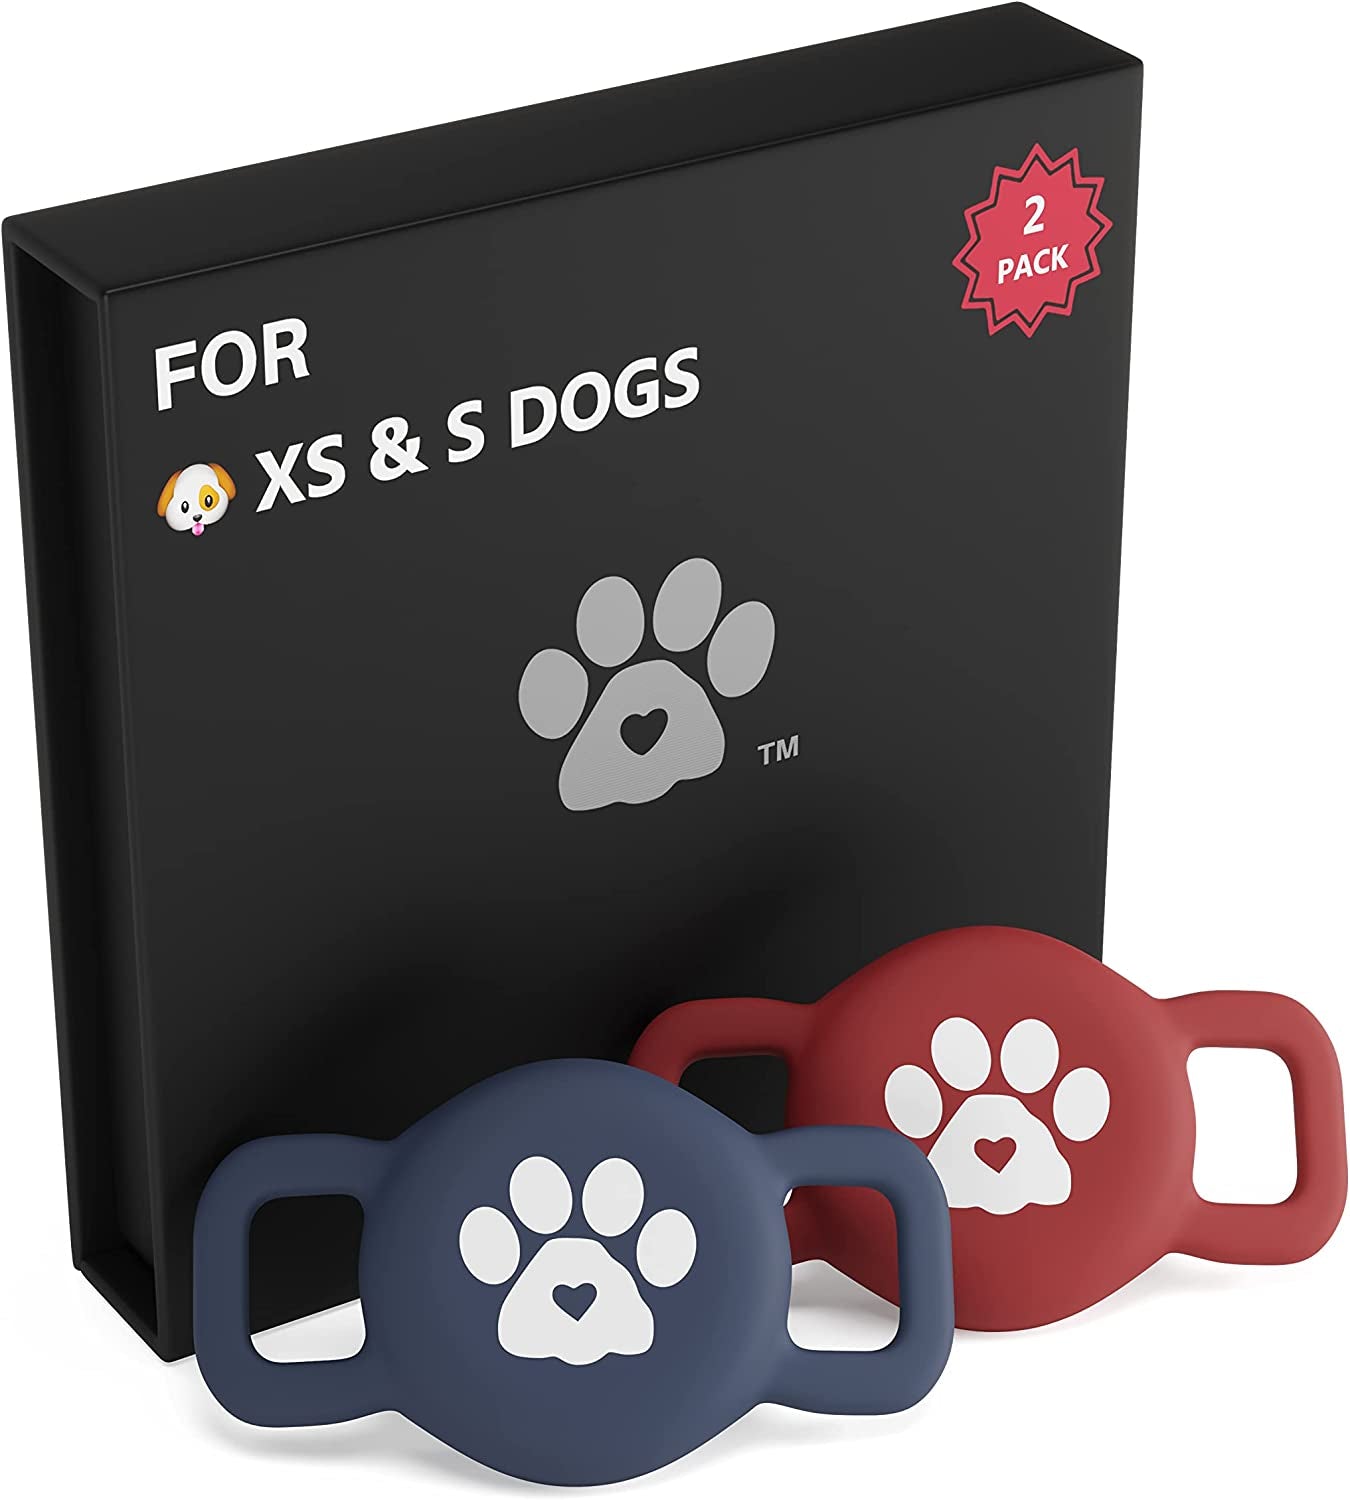 Airtag Dog Collar Holder – Available in Several Colors & Sizes - 2 Pack Silicone Dog Airtag Holder - Premium Dog Collar Airtag Holder - Apple Airtag Dog Collar Comfortably Fits Dogs & Cats Too! Electronics > GPS Accessories > GPS Cases LUVKO FAMILY Small- Cat, XS & S Dog, Dark Blue & Red Wine  